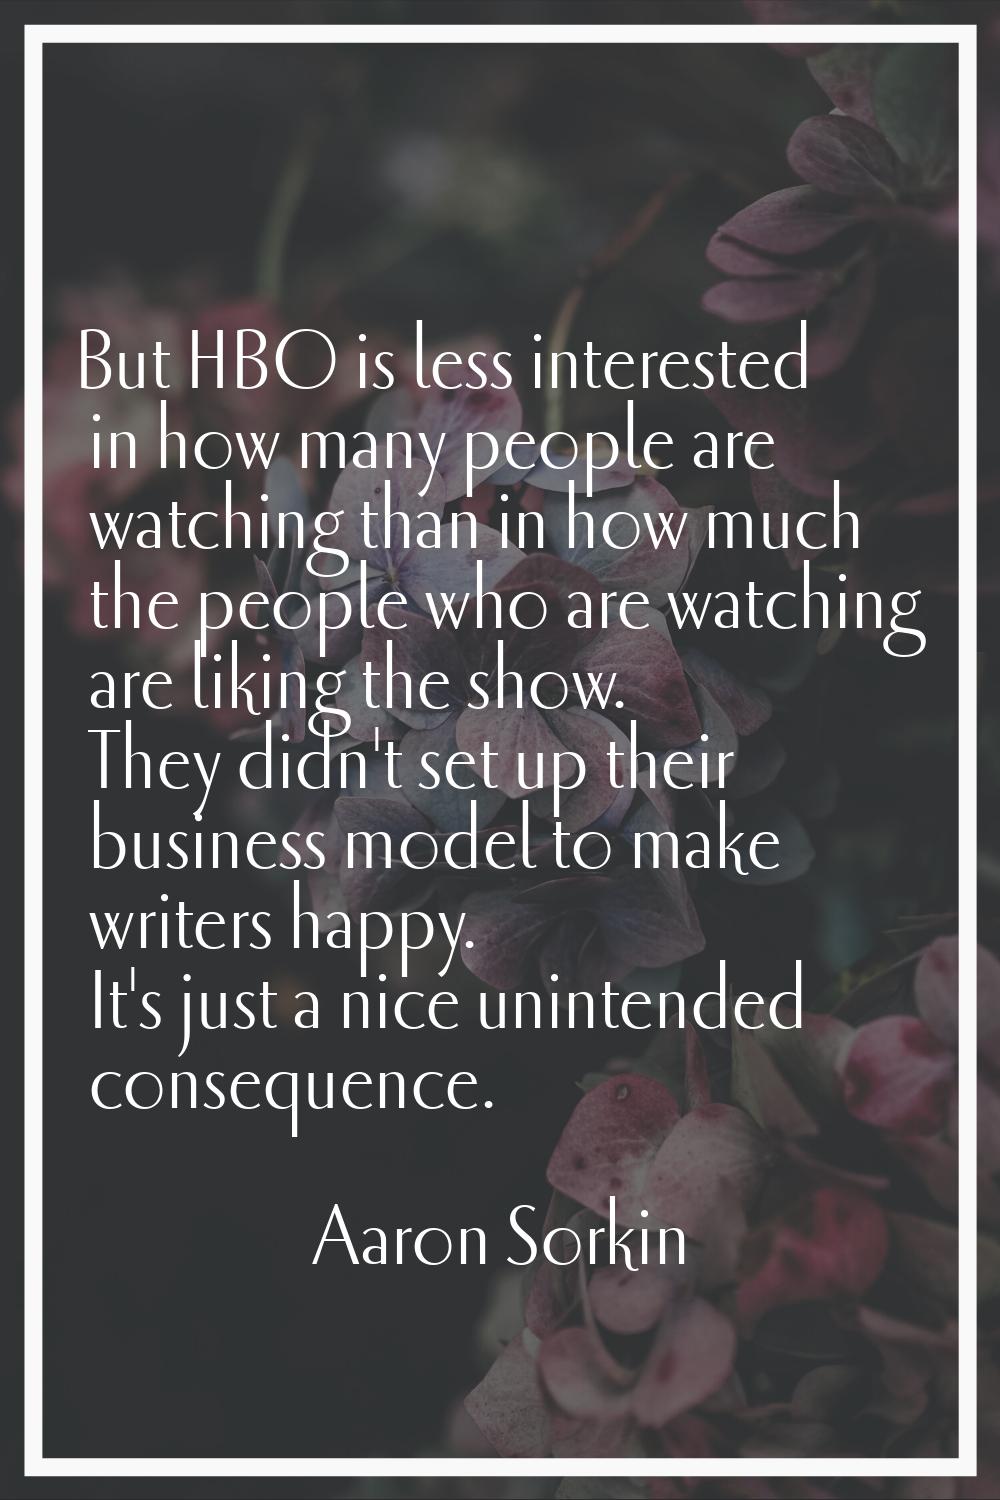 But HBO is less interested in how many people are watching than in how much the people who are watc